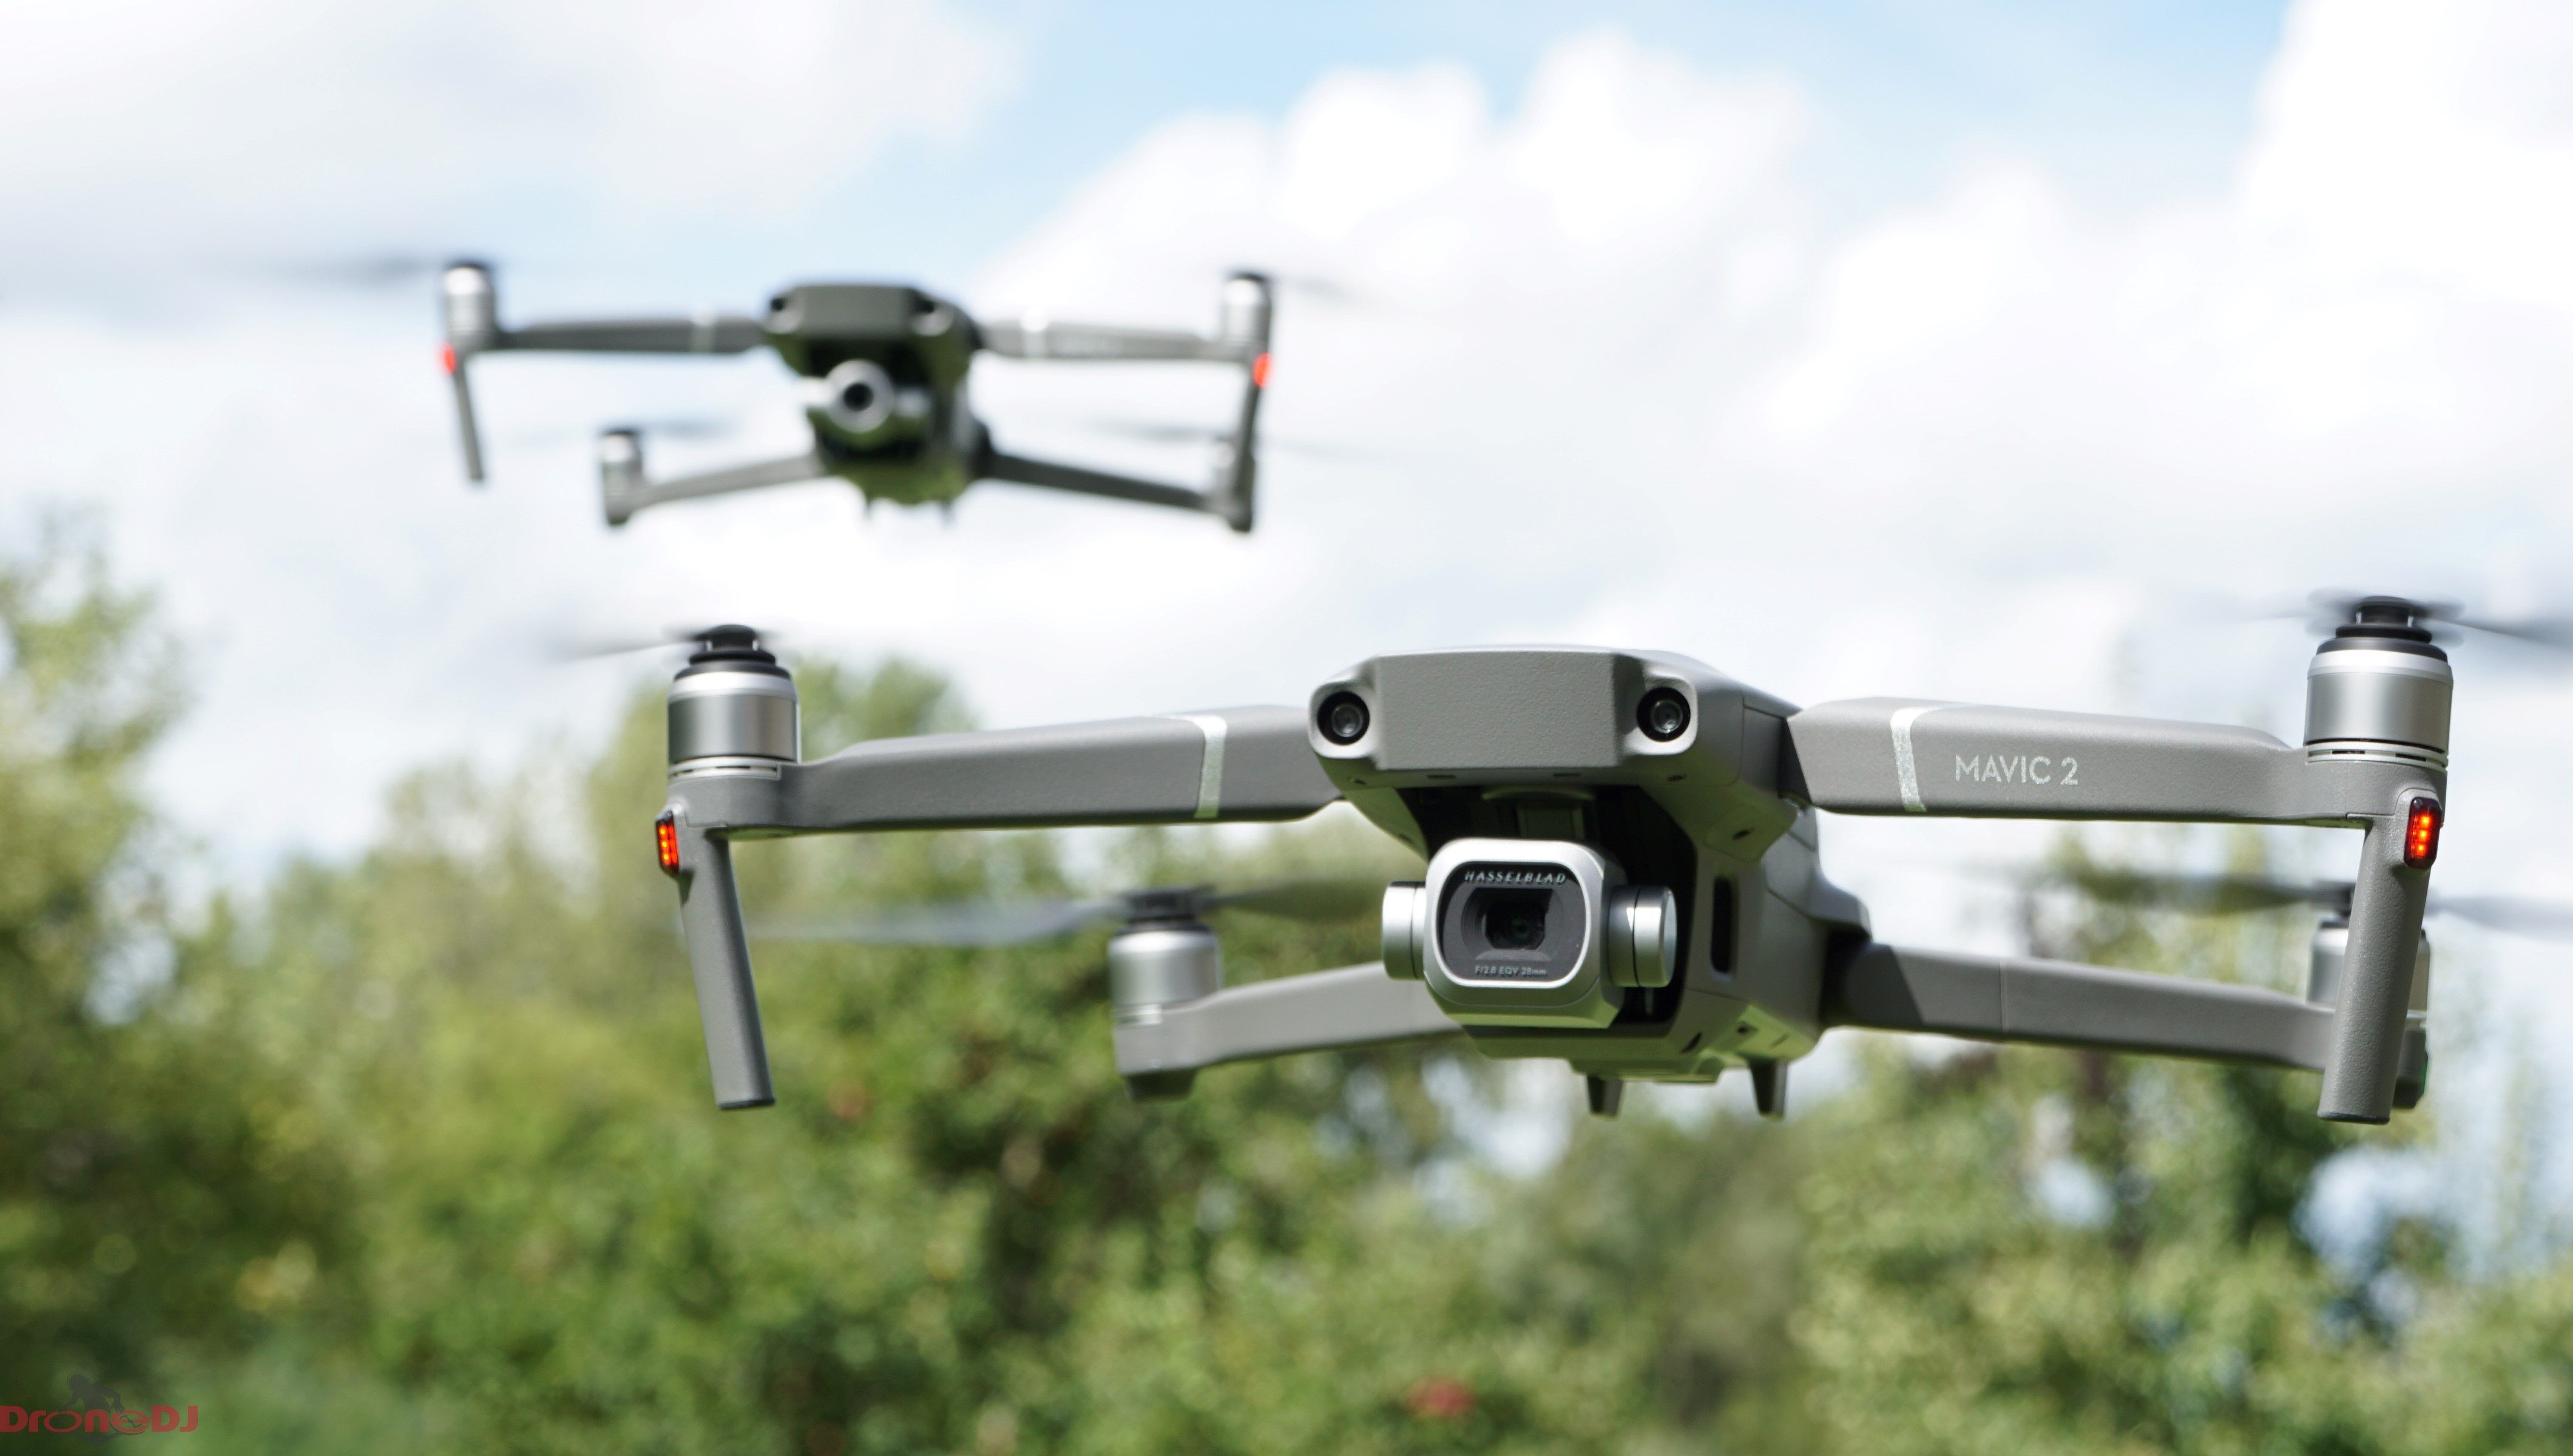 New firmware for DJI Mavic 2 drones brings Remote ID support